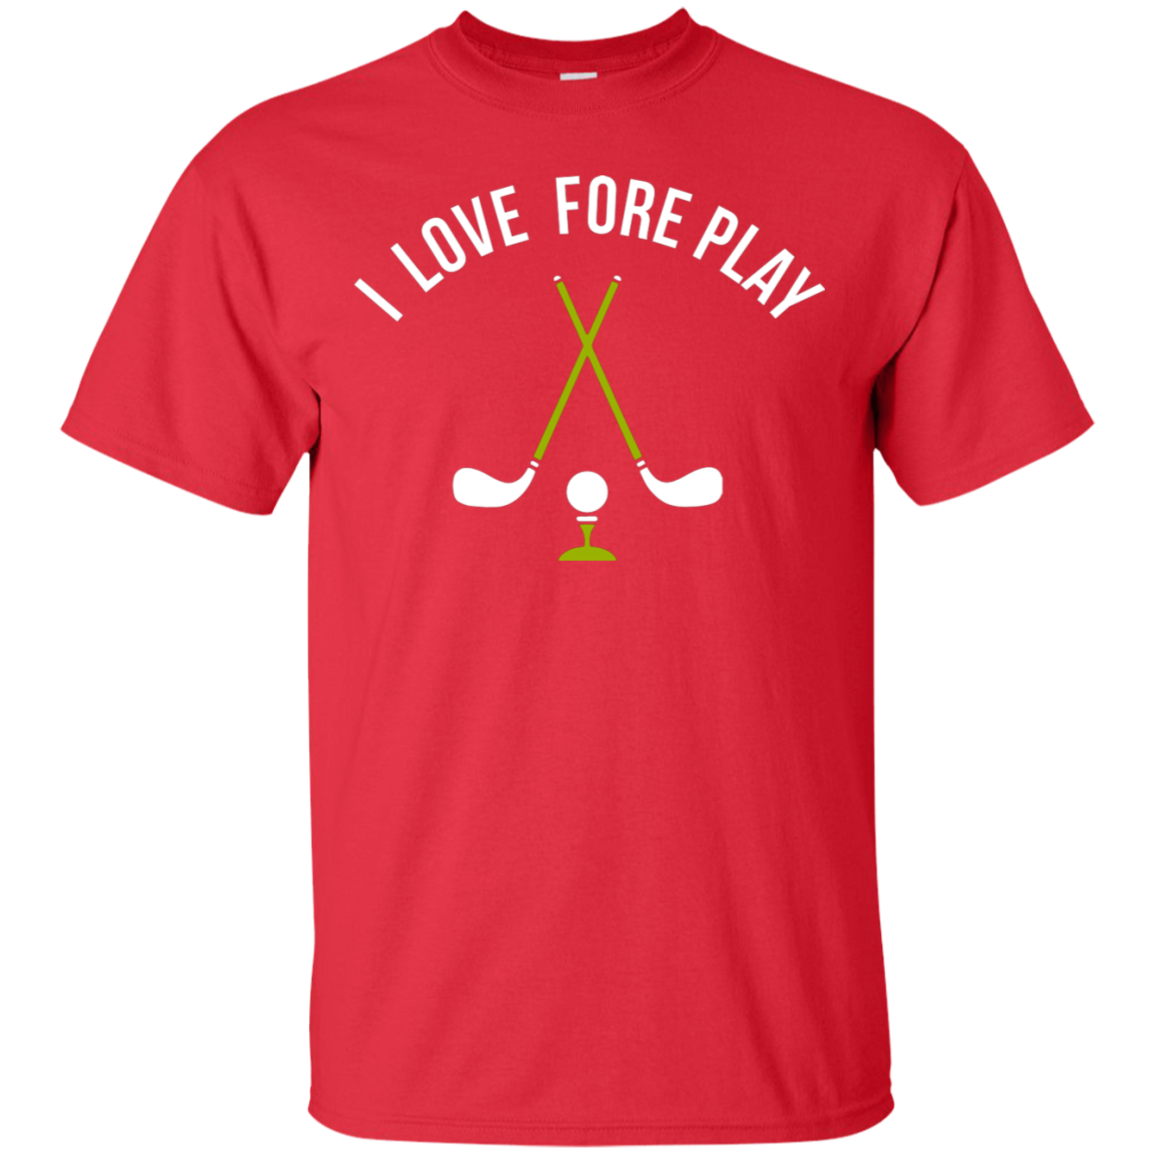 I Love Fore Play T-Shirt Apparel - The Beer Lodge